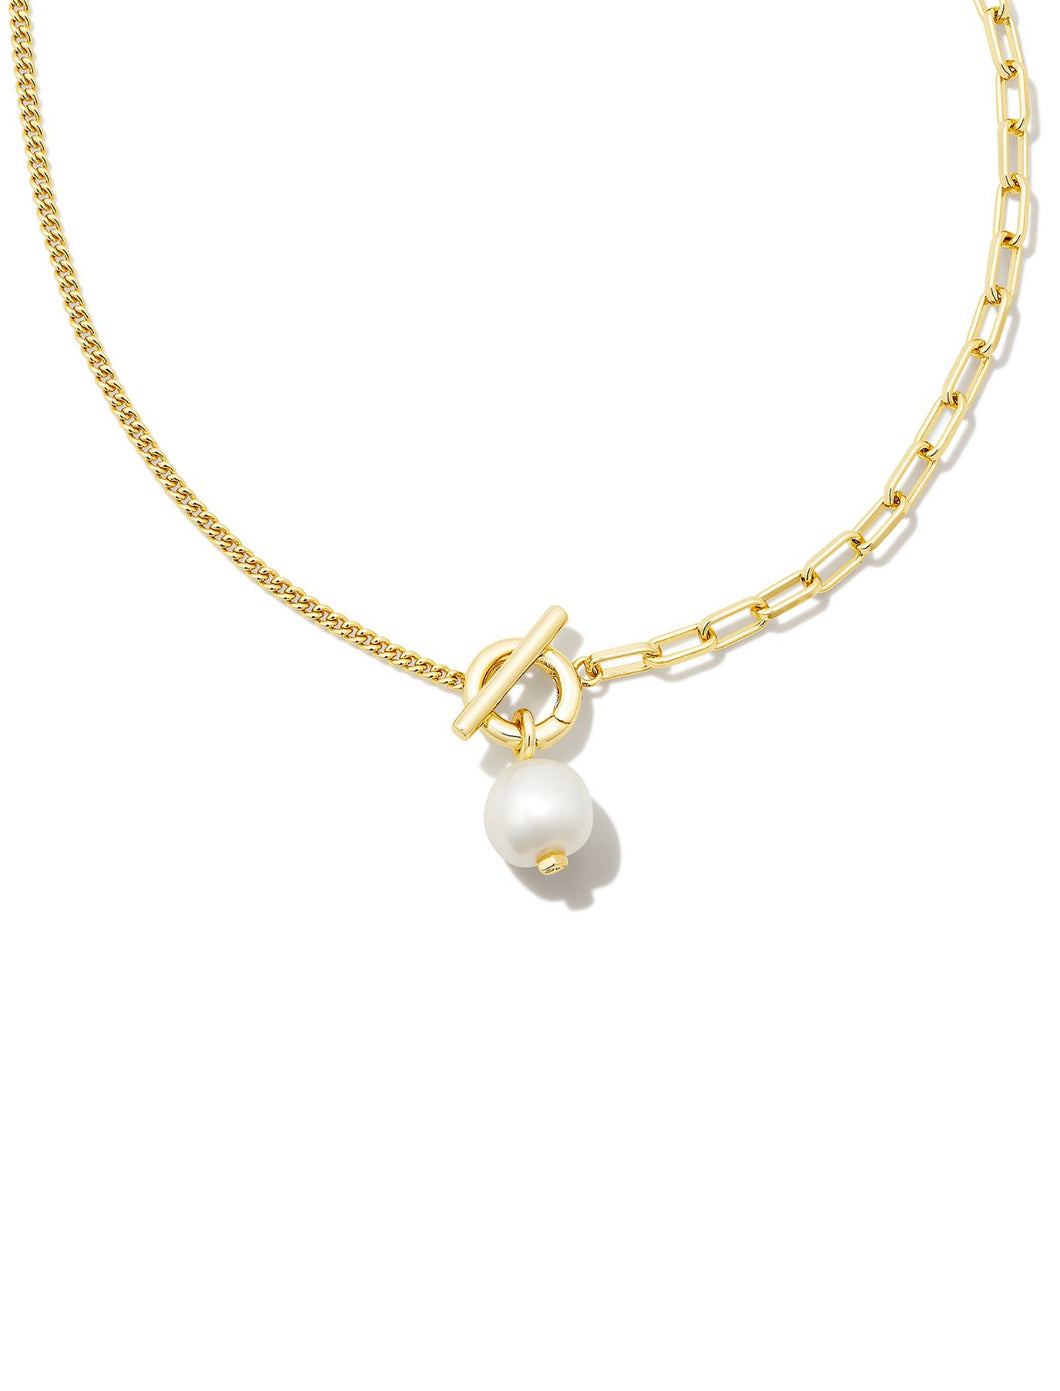 Kendra Scott: Leighton Pearl Chain Necklace in Gold